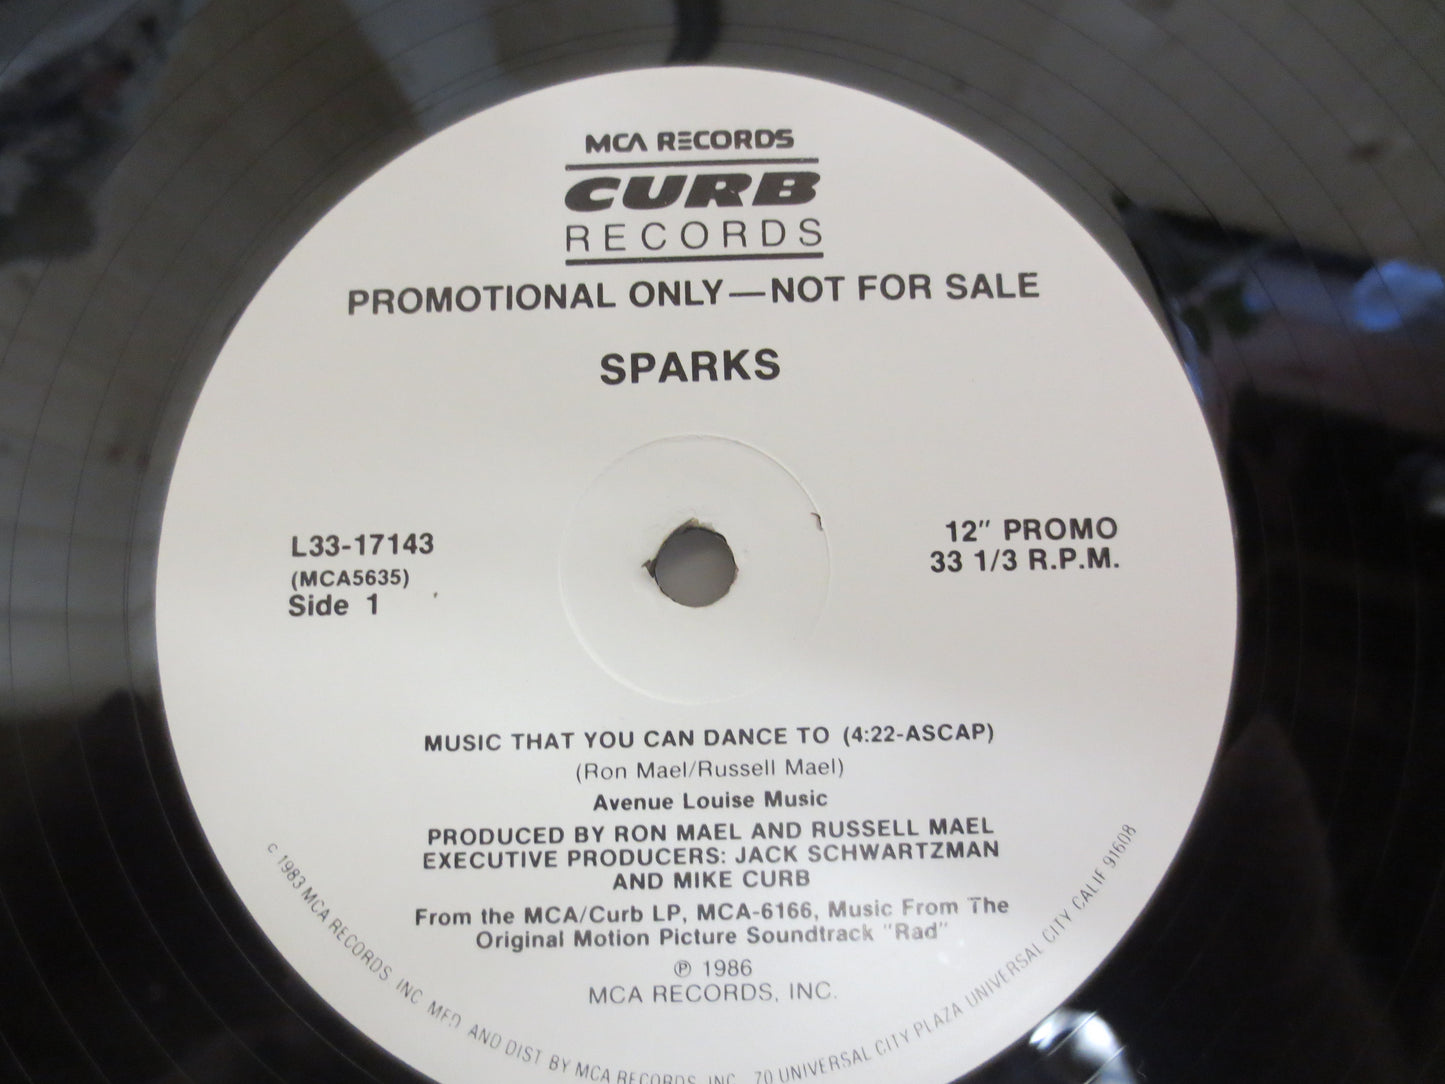 SPARKS, Music That You Can Dance To, The SPARKS Brothers, Sparks Record, Rock Records, Sparks Album, Sparks Lp, 1986 Record